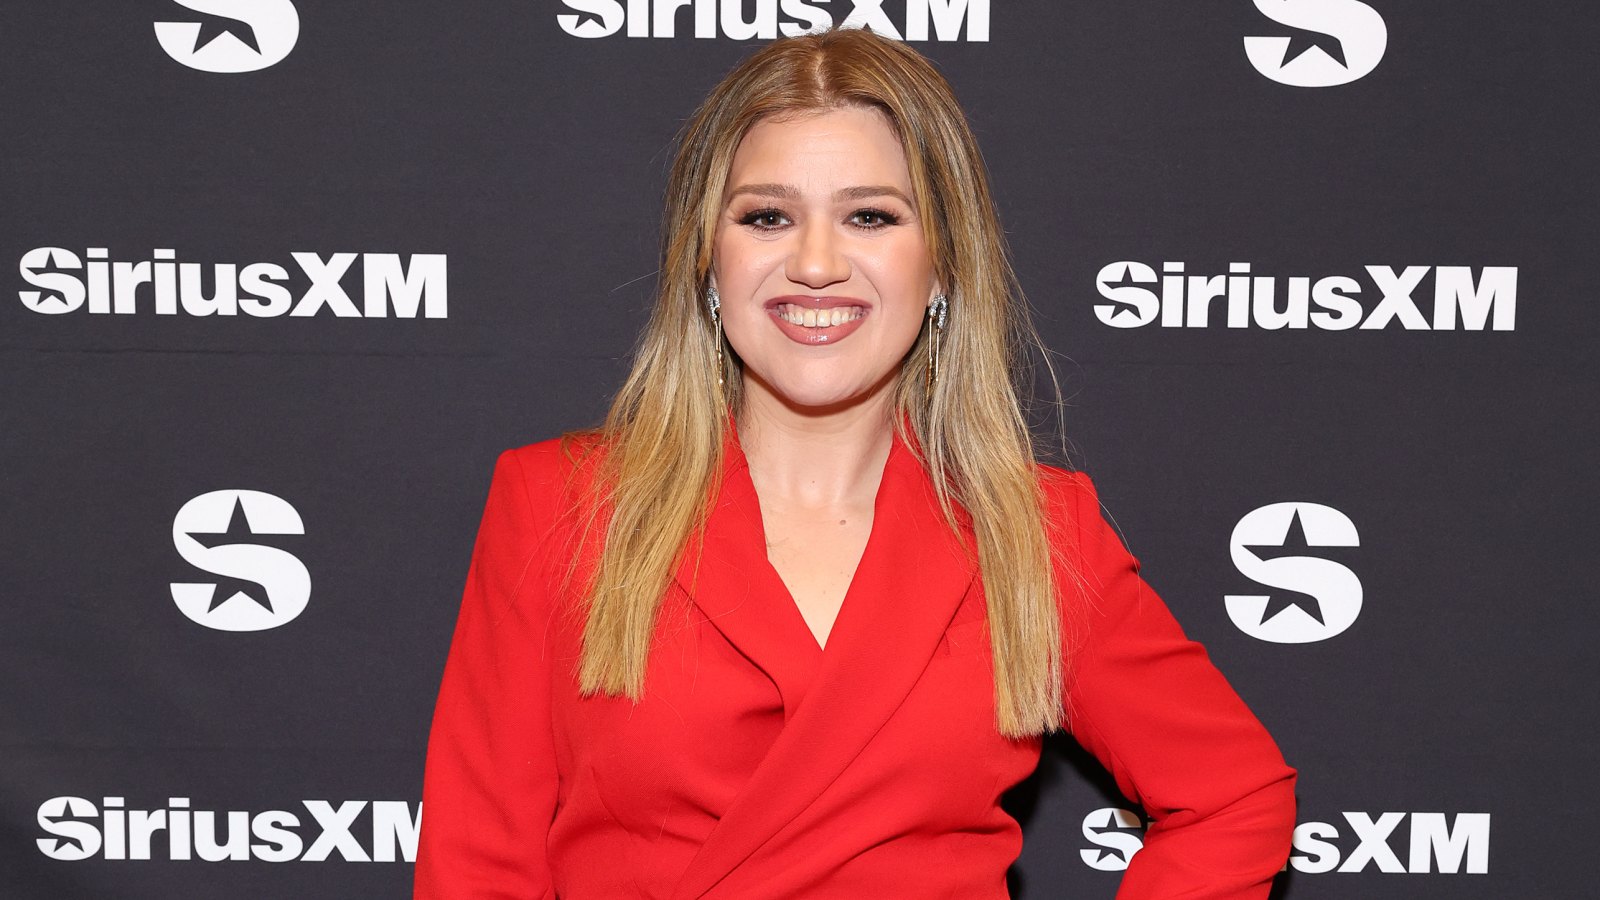 Channel Kelly Clarkson's Red Style With This Tiered Midi Dress | Us Weekly